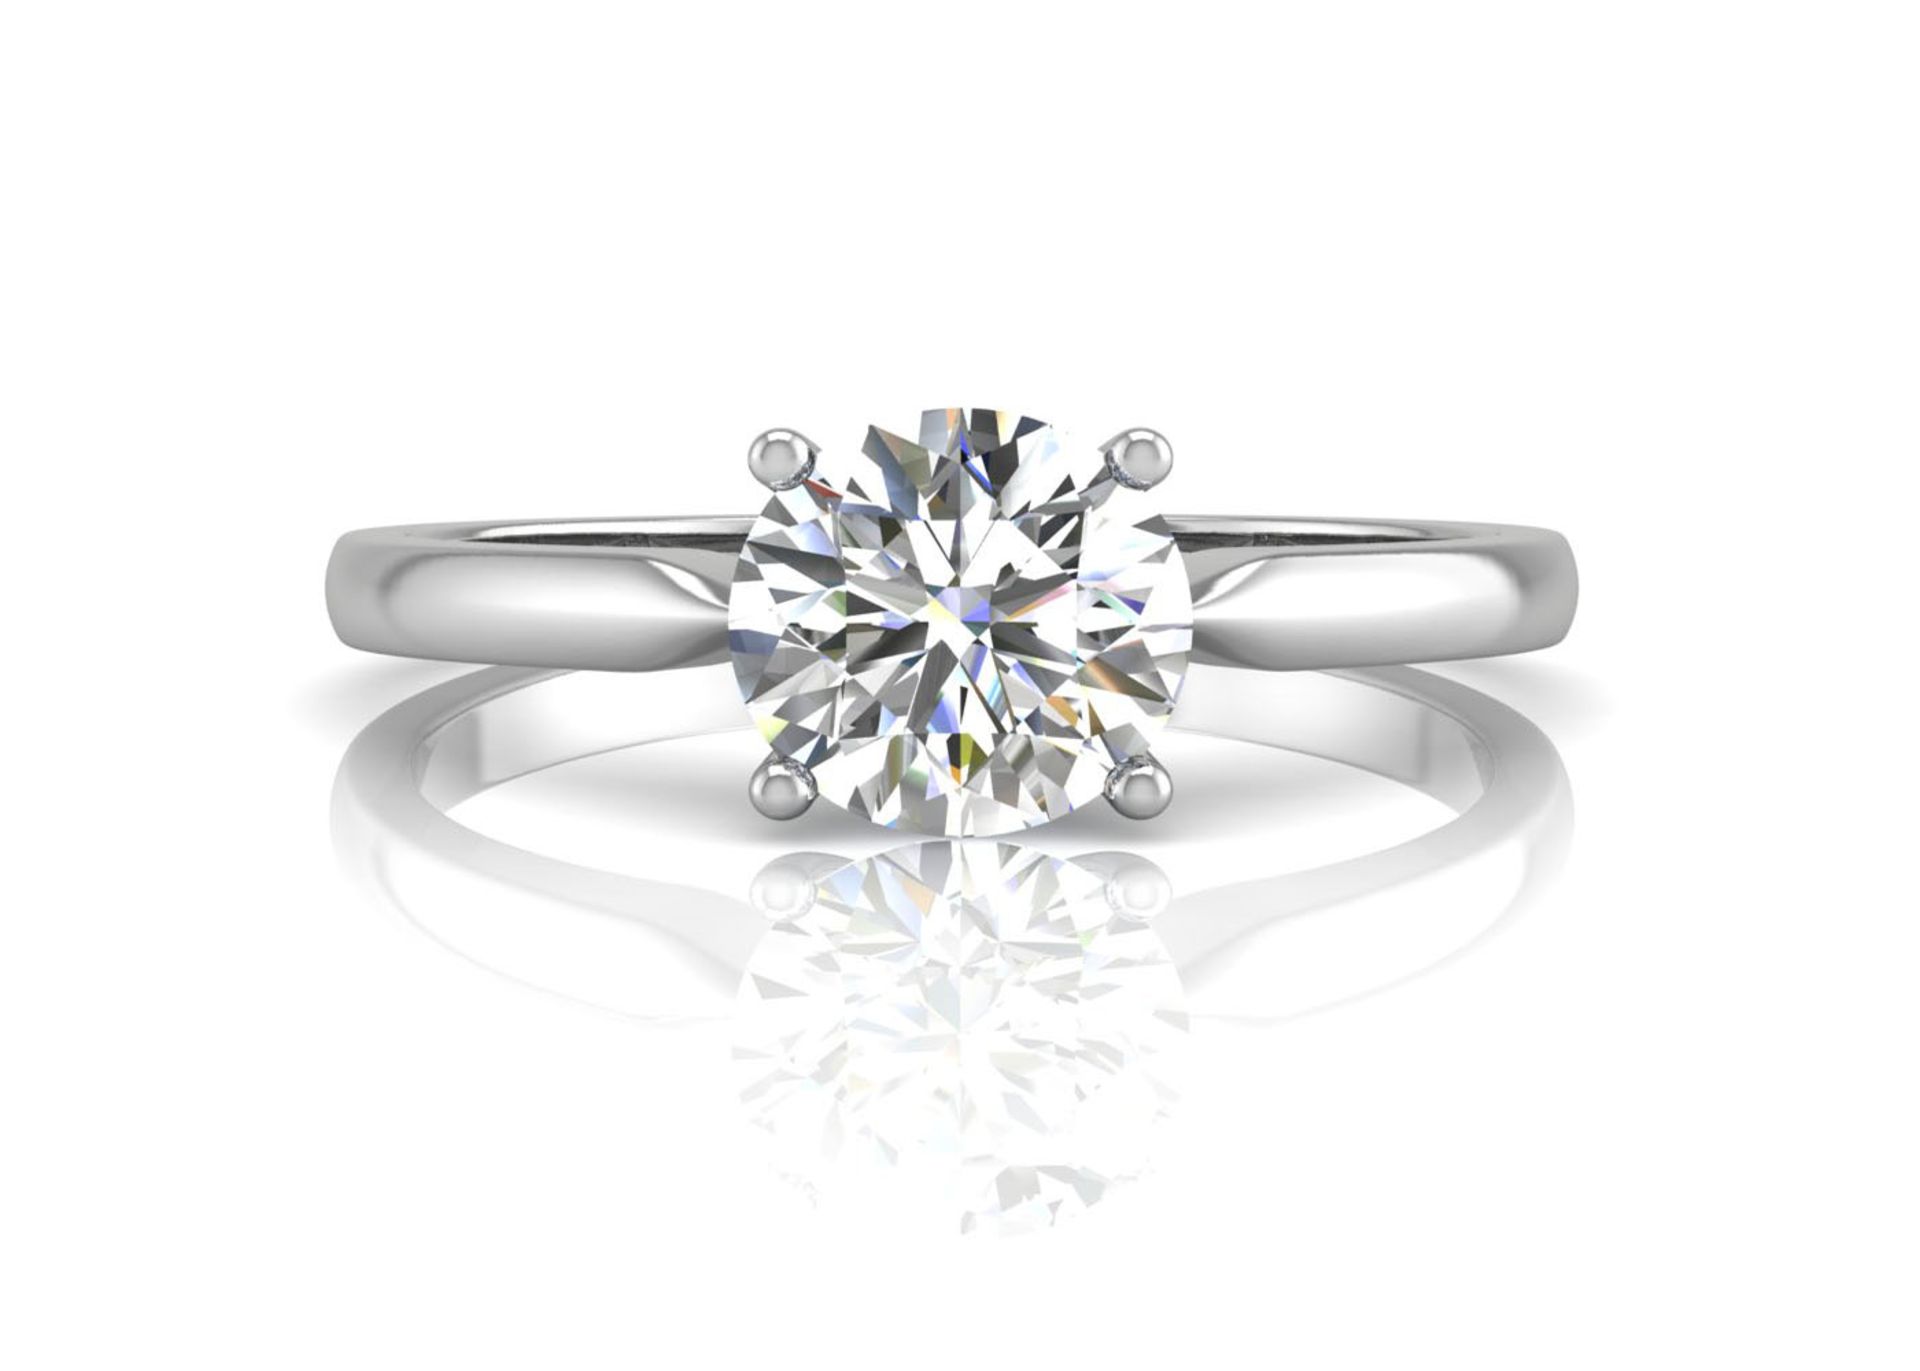 18ct White Gold Single Stone Prong Set Diamond Ring 0.50 Carats - Valued By AGI £7,320.00 - A - Image 3 of 5